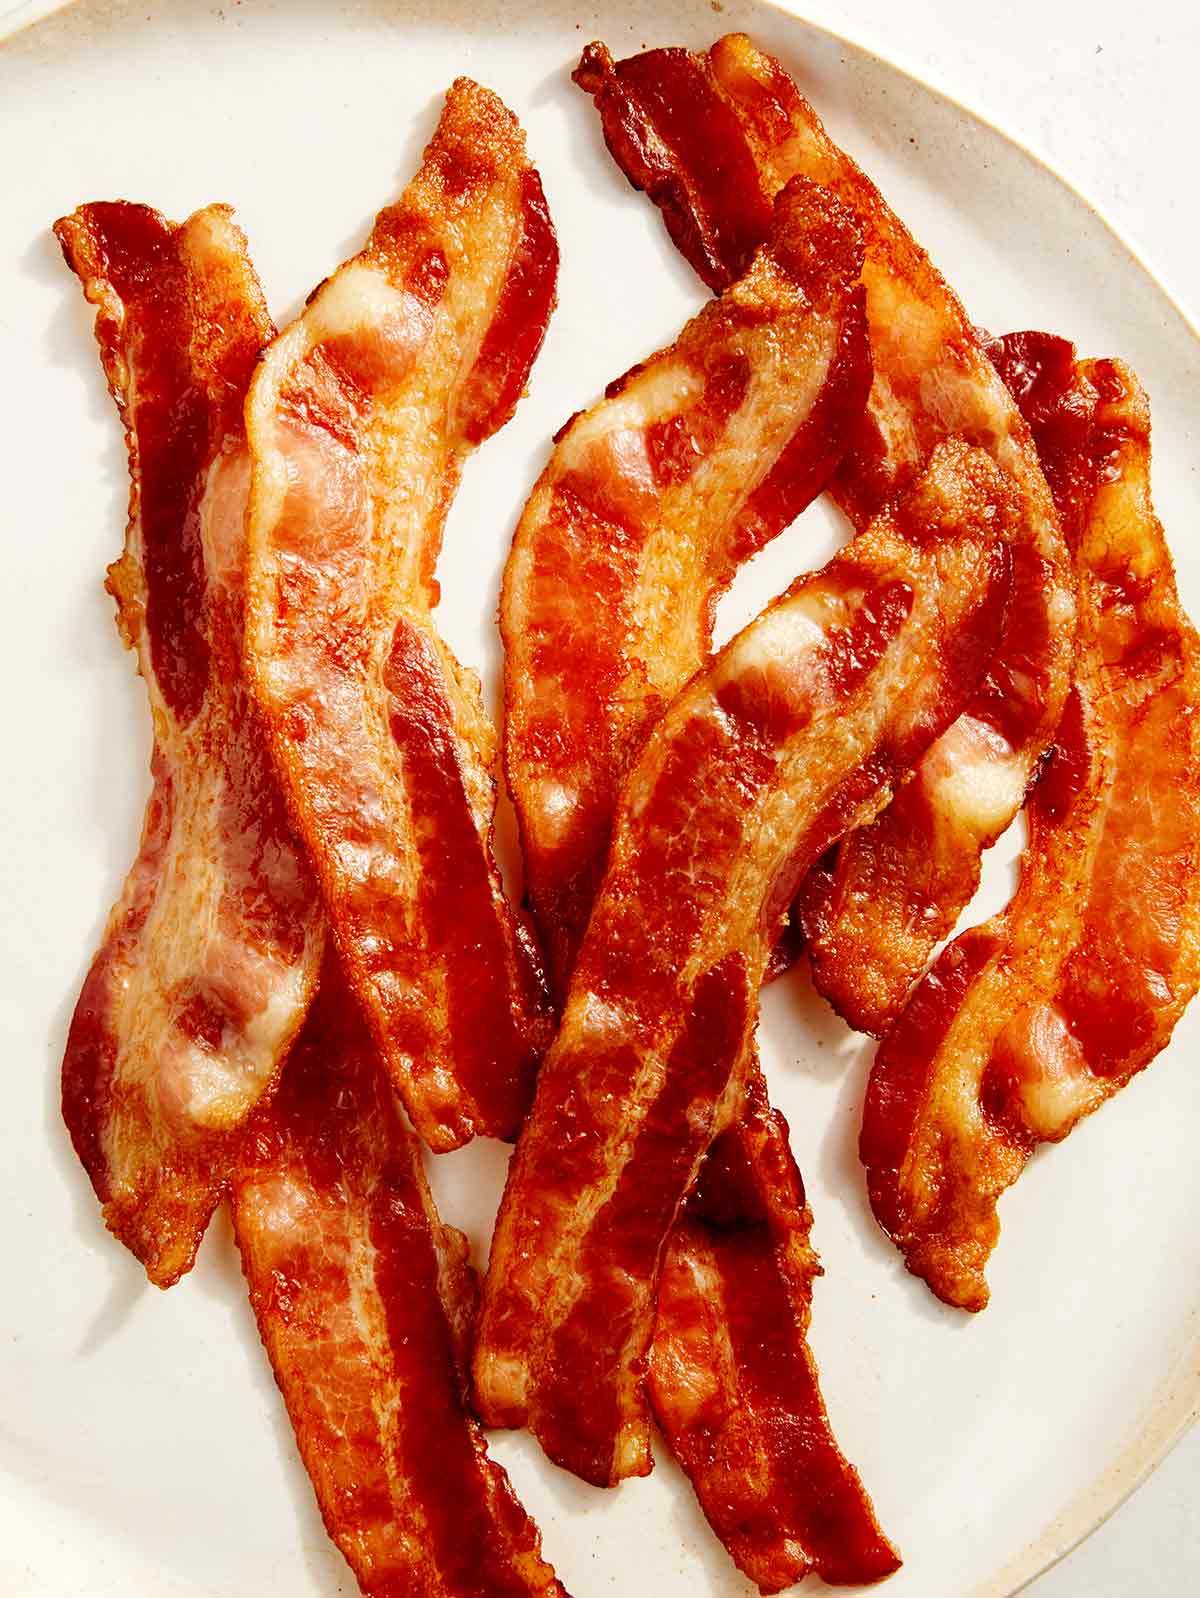 4 Easy Steps to Get Your Bacon Perfectly Crispy In the Oven